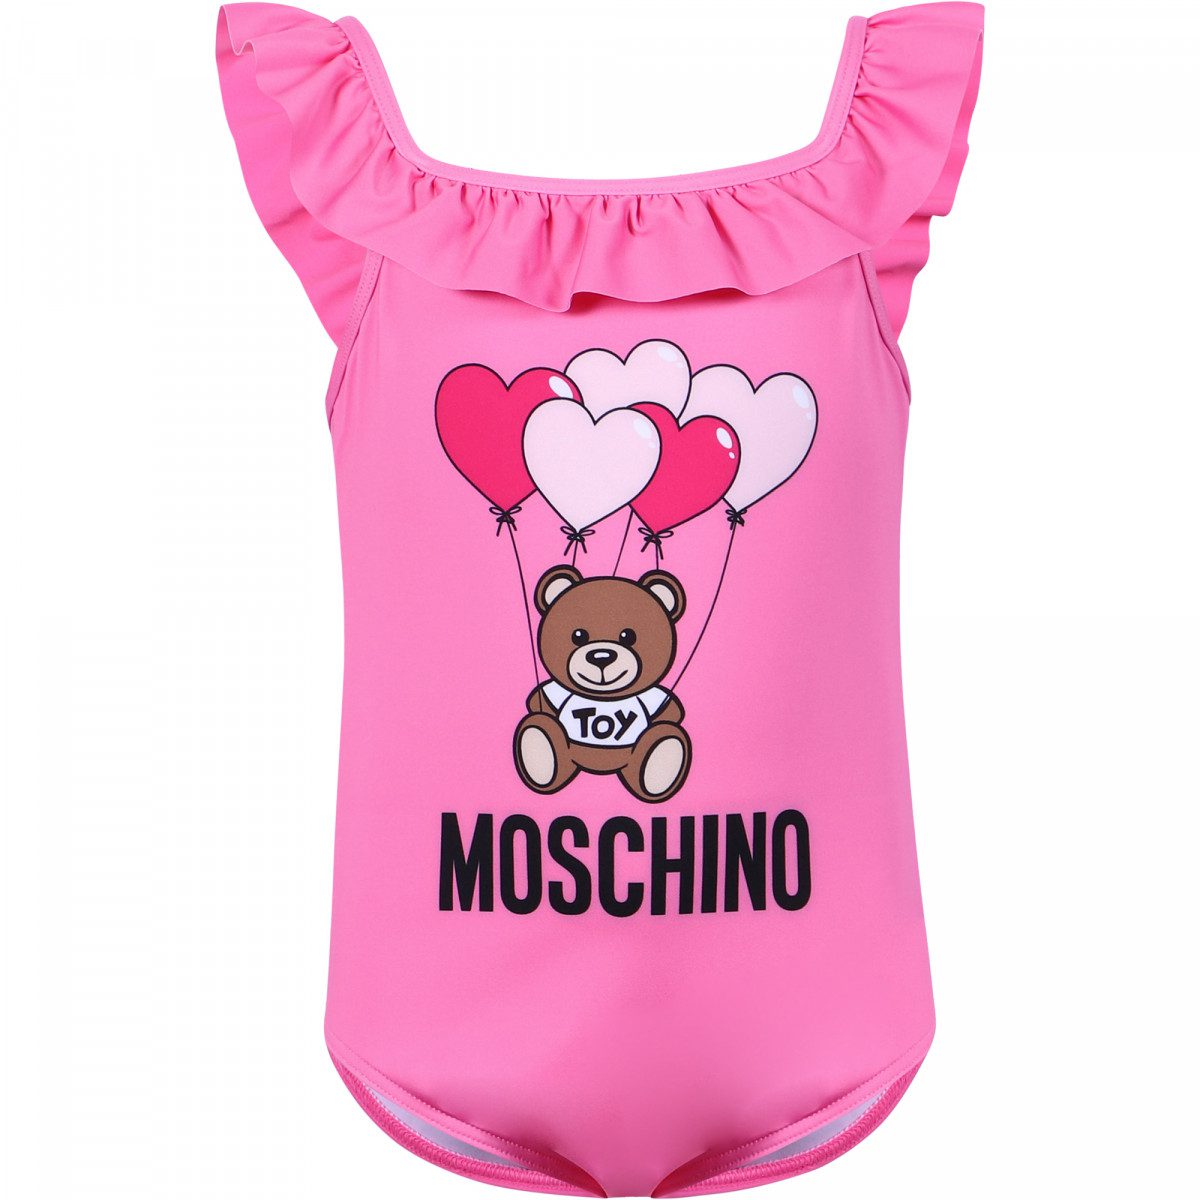 Moschino Baby Swimsuit MDL00C - Little 